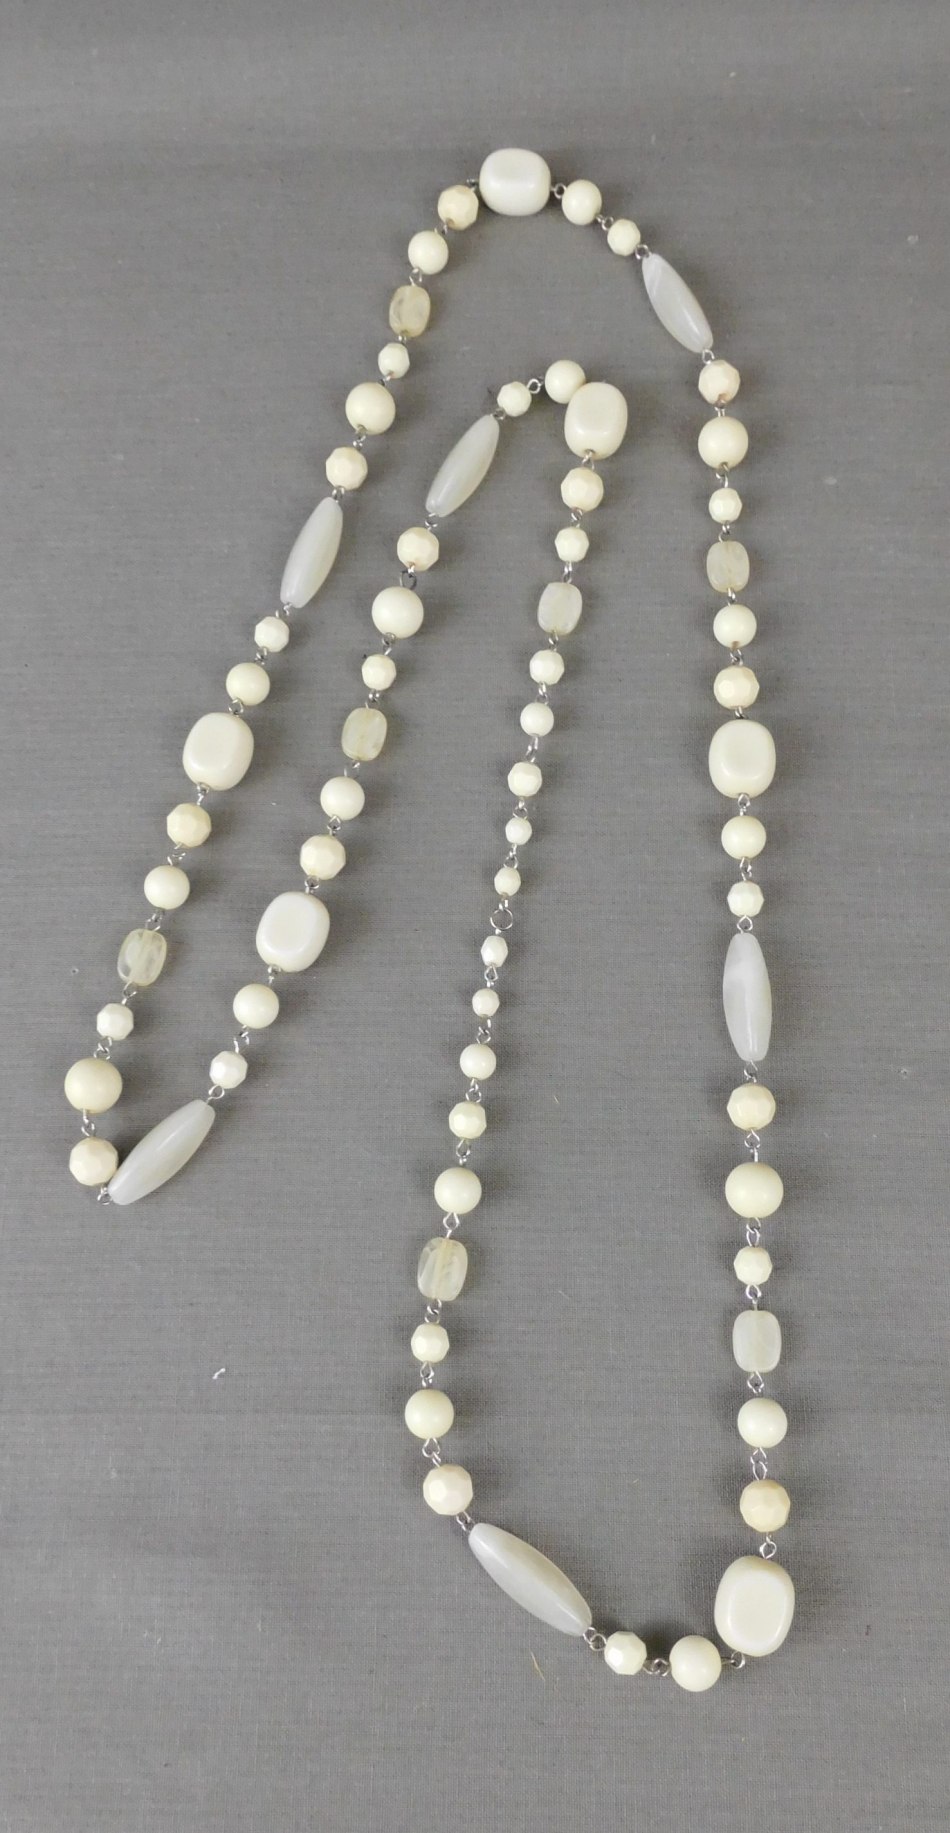 Vintage Ivory Plastic Beads Necklace, 46 inches long, 1950s 1960s